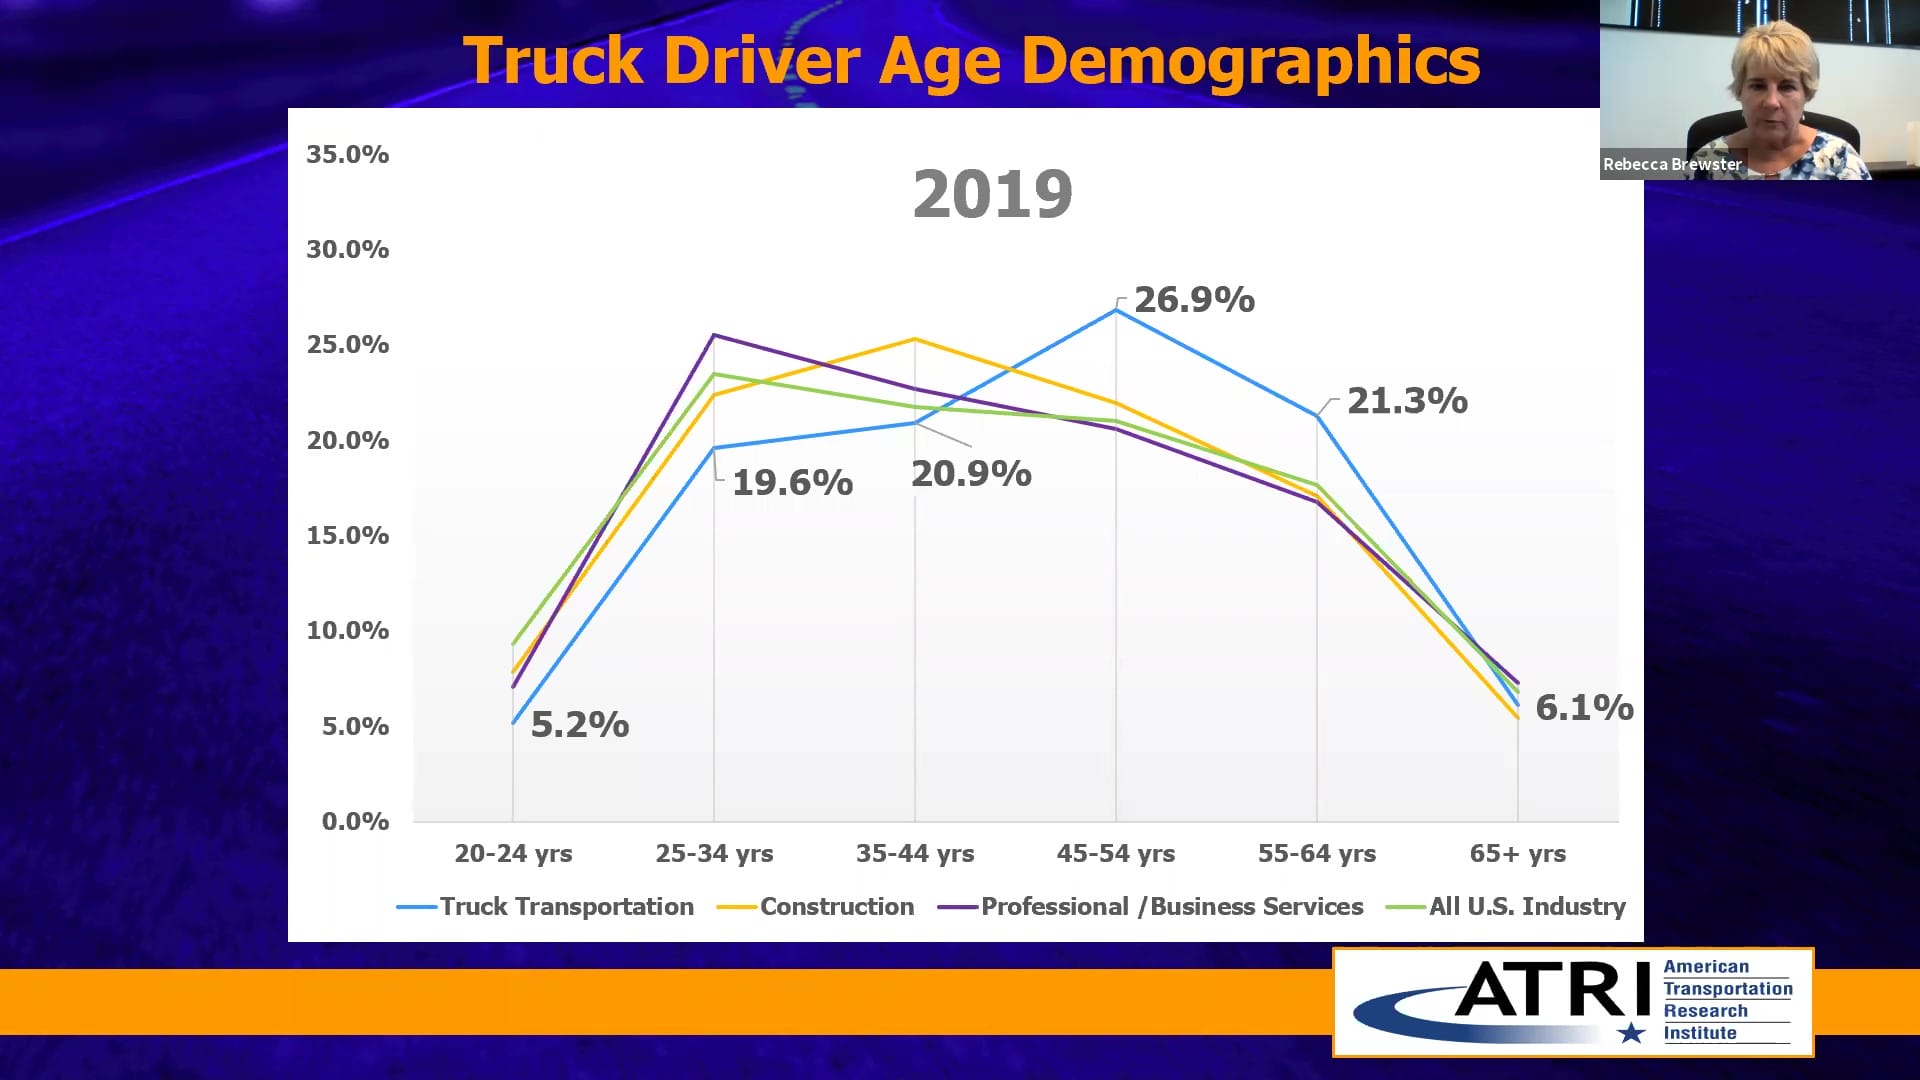 Trucking Industry Concerns 2020 from ATRI Truck Driver Age Demographics